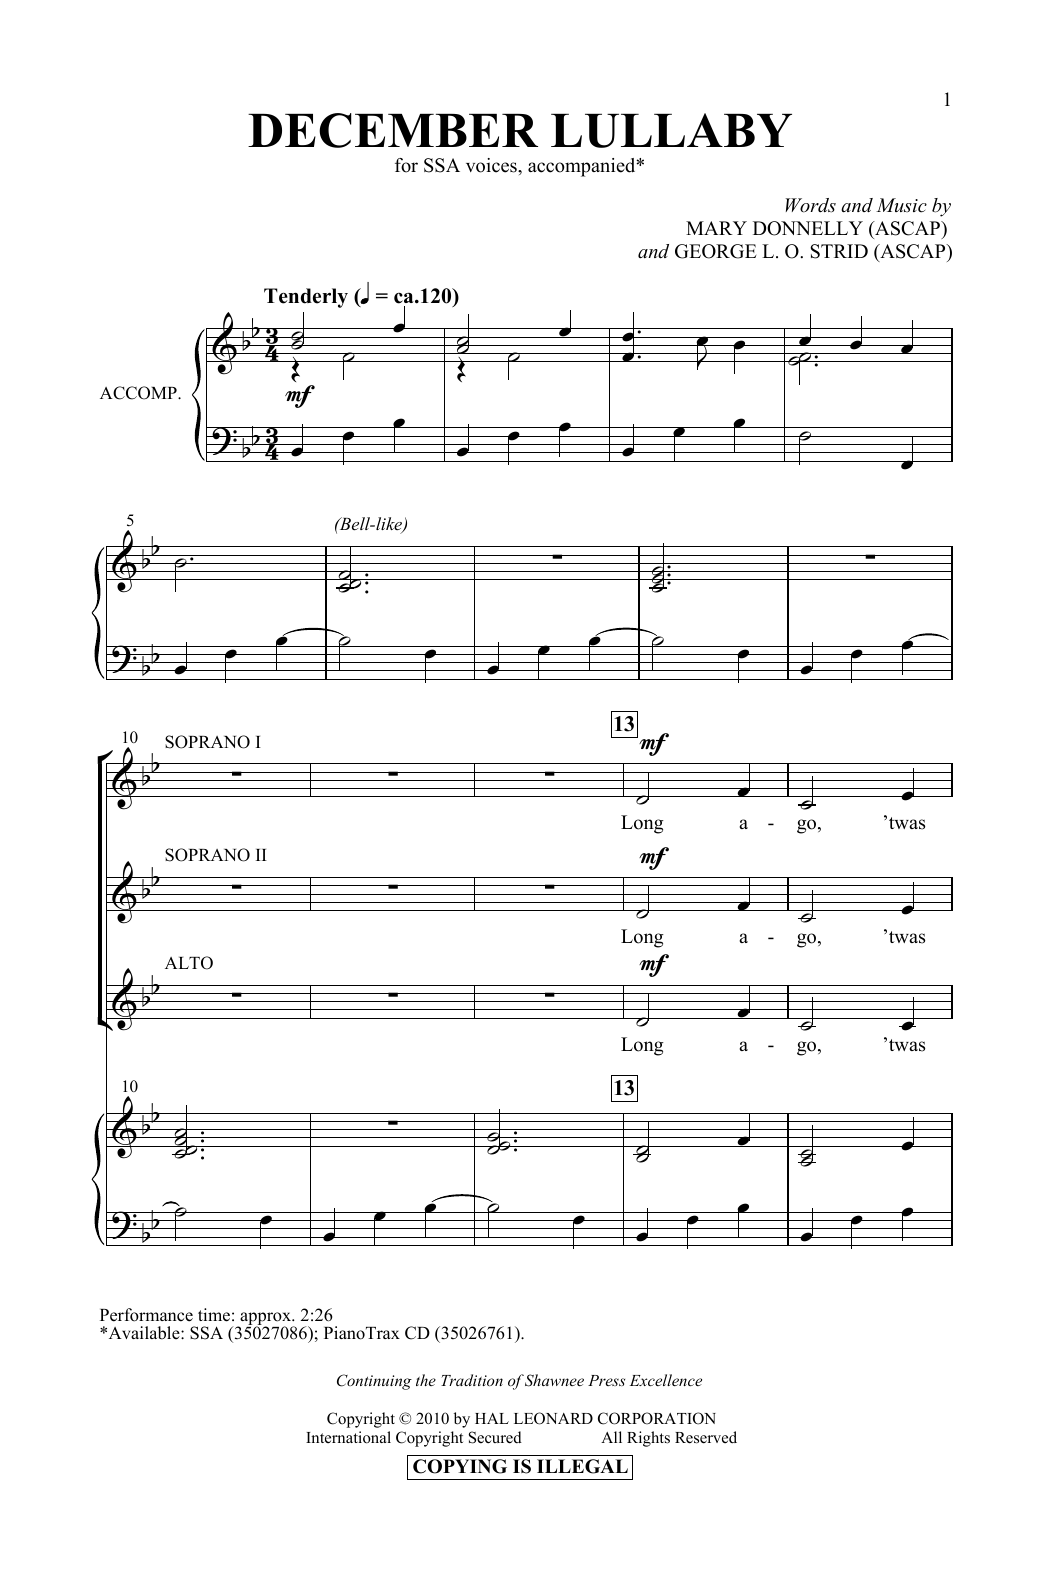 Download Mary Donnelly & George L.O. Strid December Lullaby Sheet Music